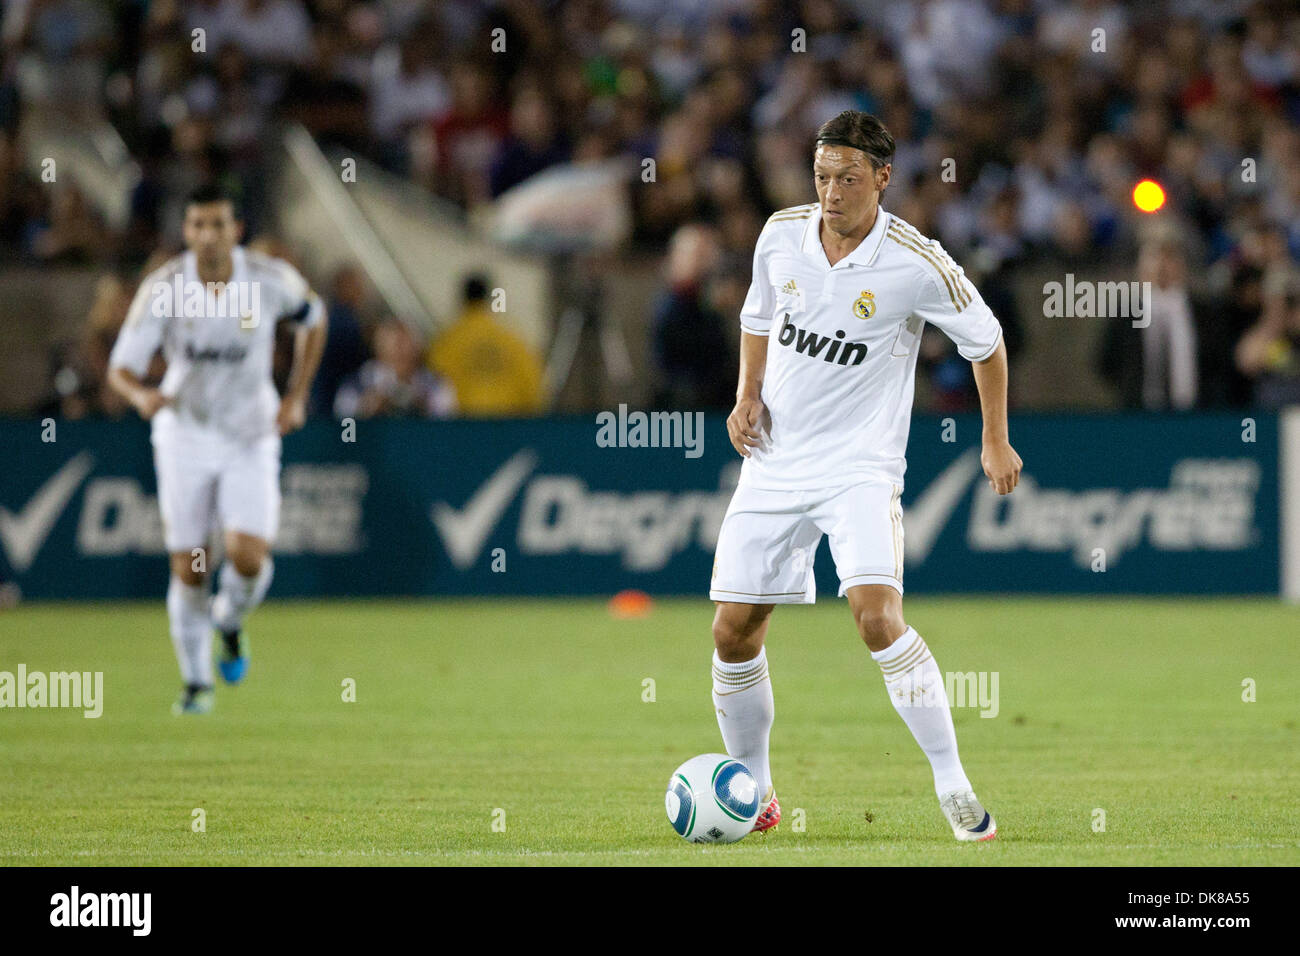 July 16, 2011 - Los Angeles, California, U.S - Real Madrid C.F. midfielder Mesut Ozil #23 in action during the World Football Challenge game between La Liga powerhouse Real Madrid and the Los Angeles Galaxy at the Los Angeles Memorial Coliseum. Real Madrid went on to defeat the Galaxy with a final score of 4-1. (Credit Image: © Brandon Parry/Southcreek Global/ZUMAPRESS.com) Stock Photo